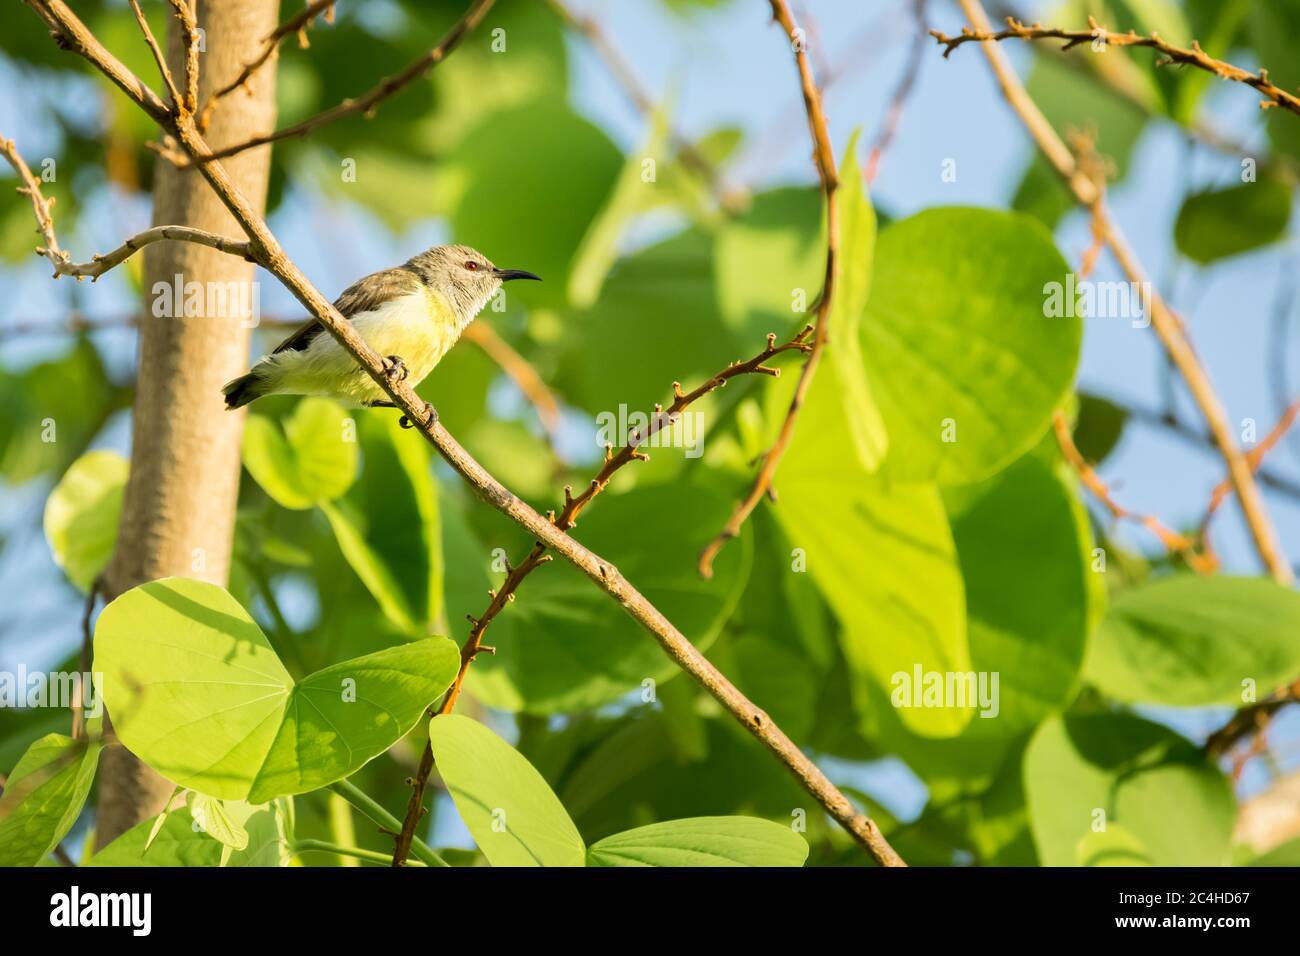 Purple rumped Sunbird (Leptocoma zeylonica) perched on a tree with bright green leaves Stock Photo